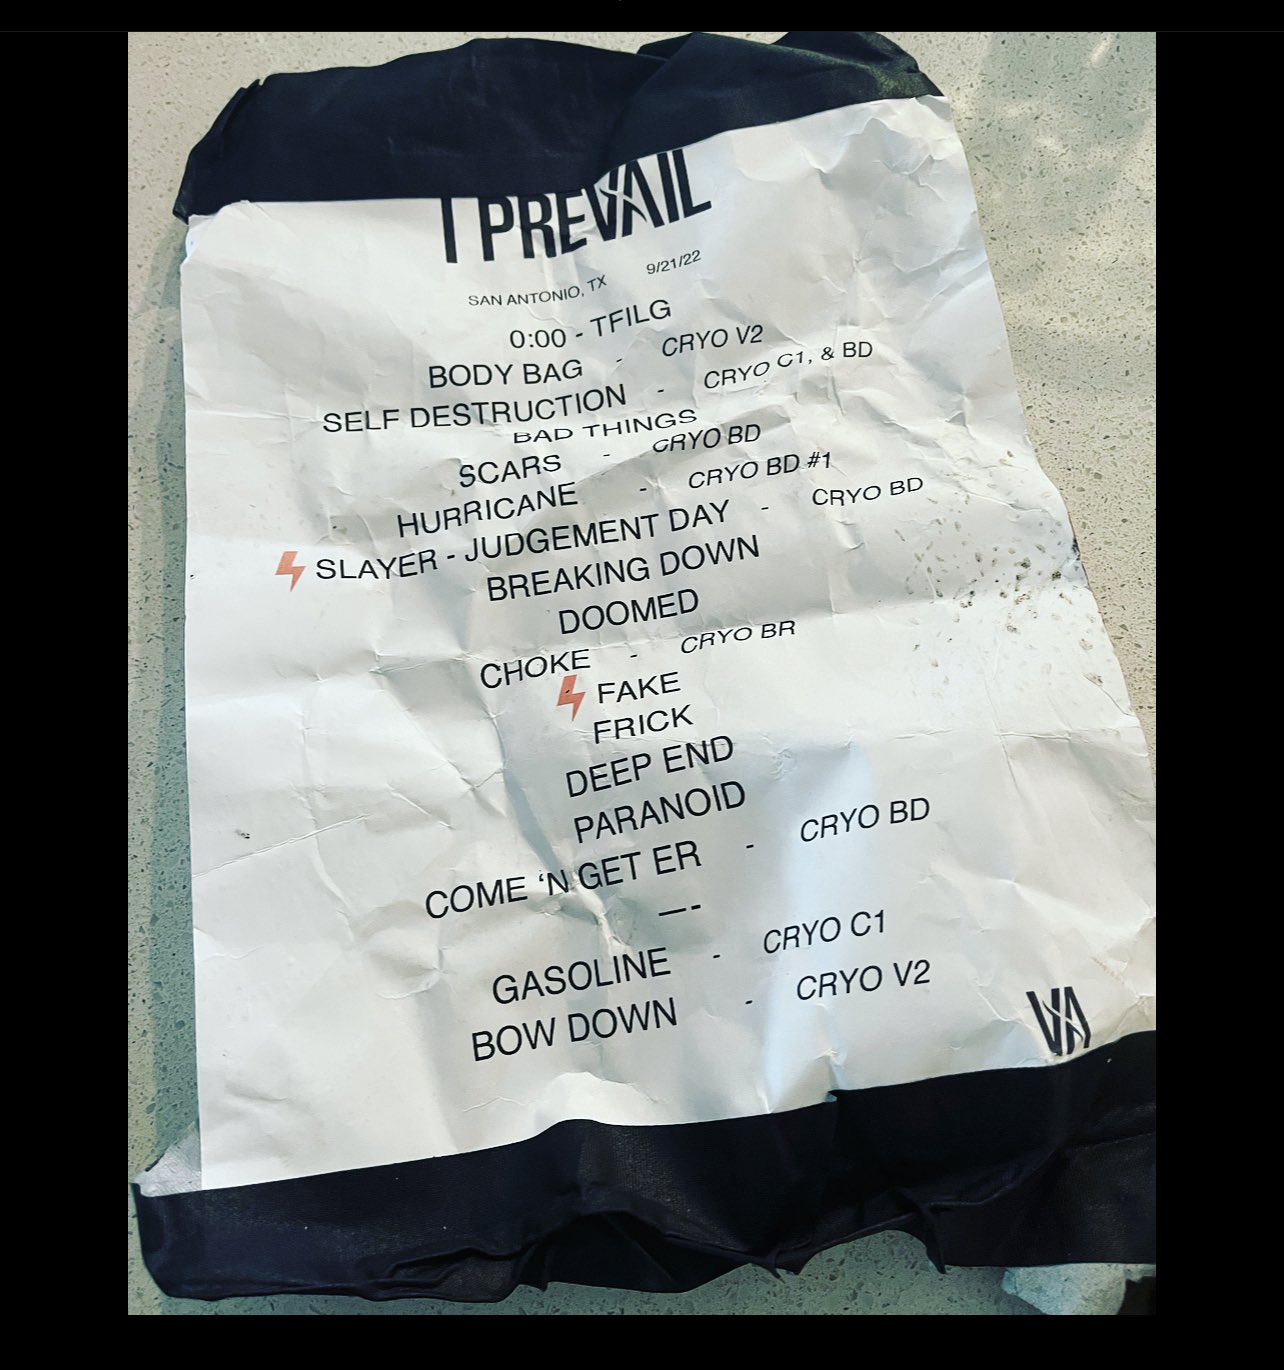 I Prevail on X: You're a legend. Sorry the venue security dropped you.  Absolutely unacceptable. 😡 Check your dms, we'd love to send you some  merch. / X